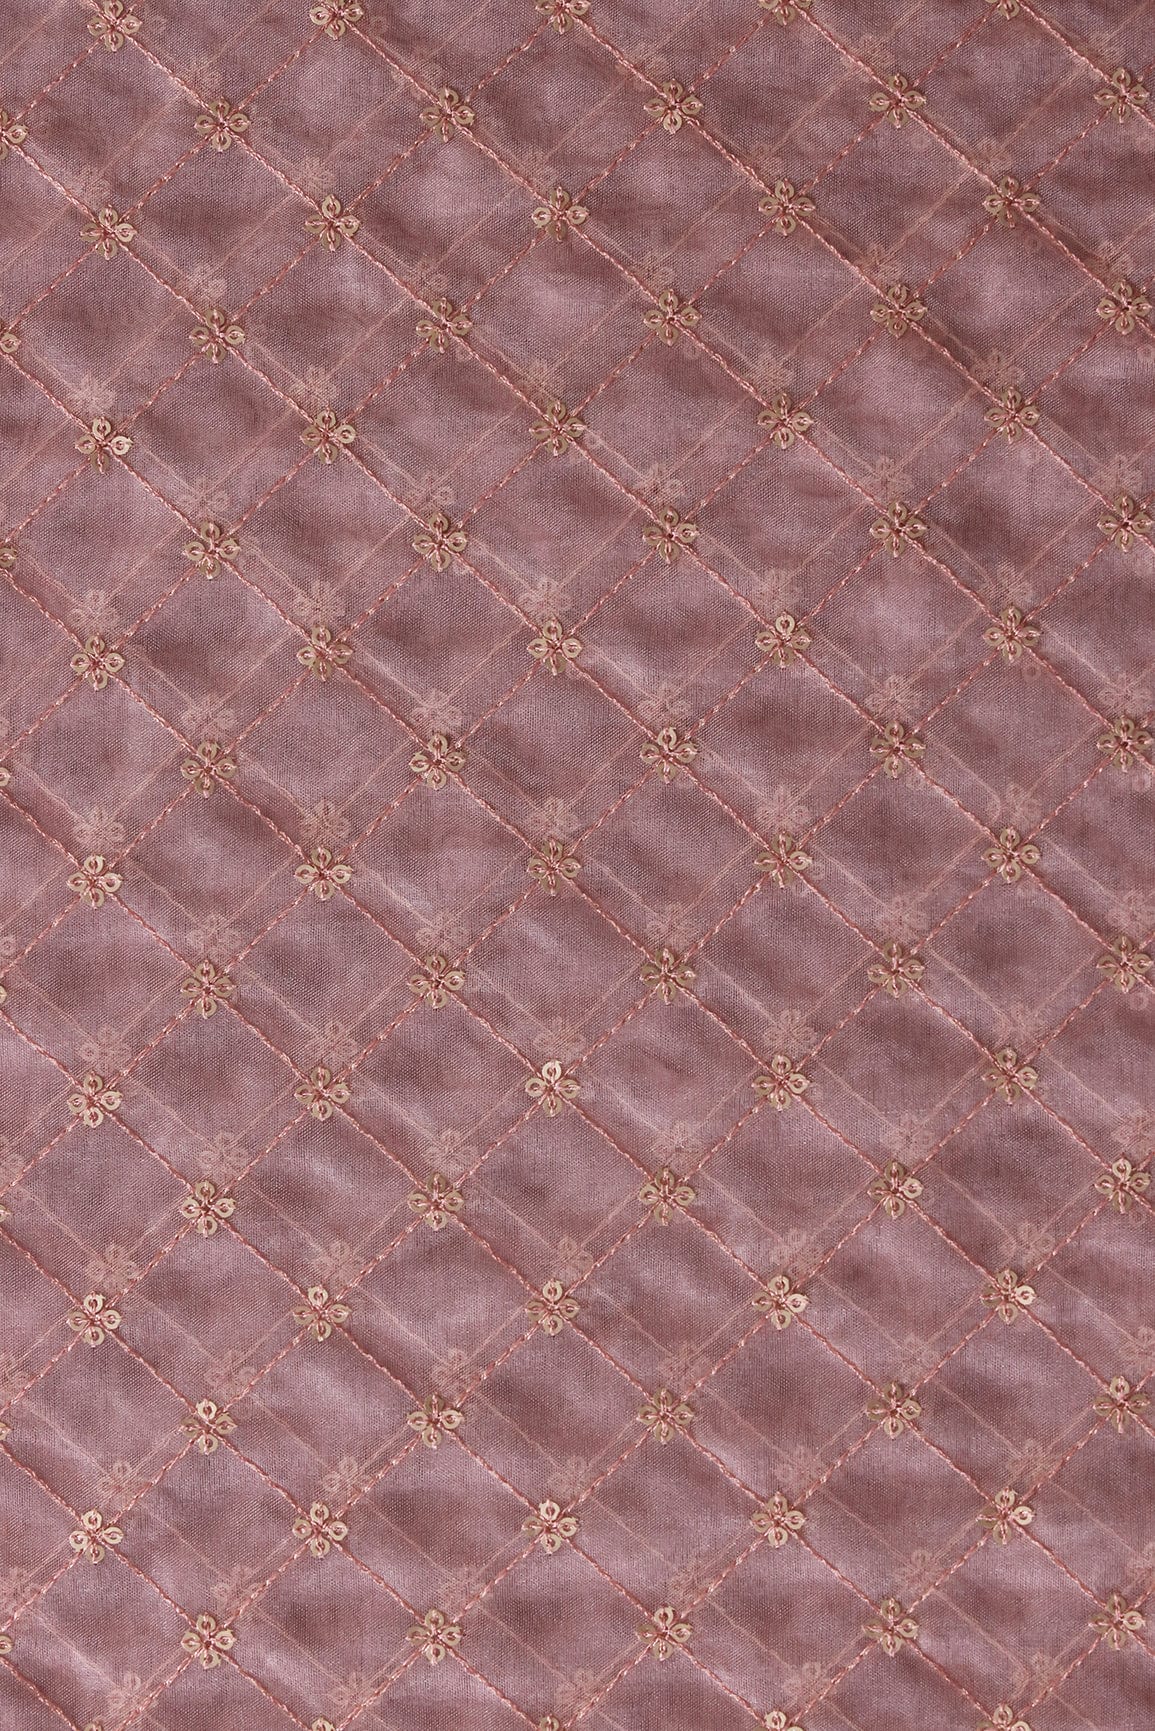 doeraa Embroidery Fabrics Mauve Thread With Gold Sequins Checks Embroidery Work On Mauve Organza Fabric